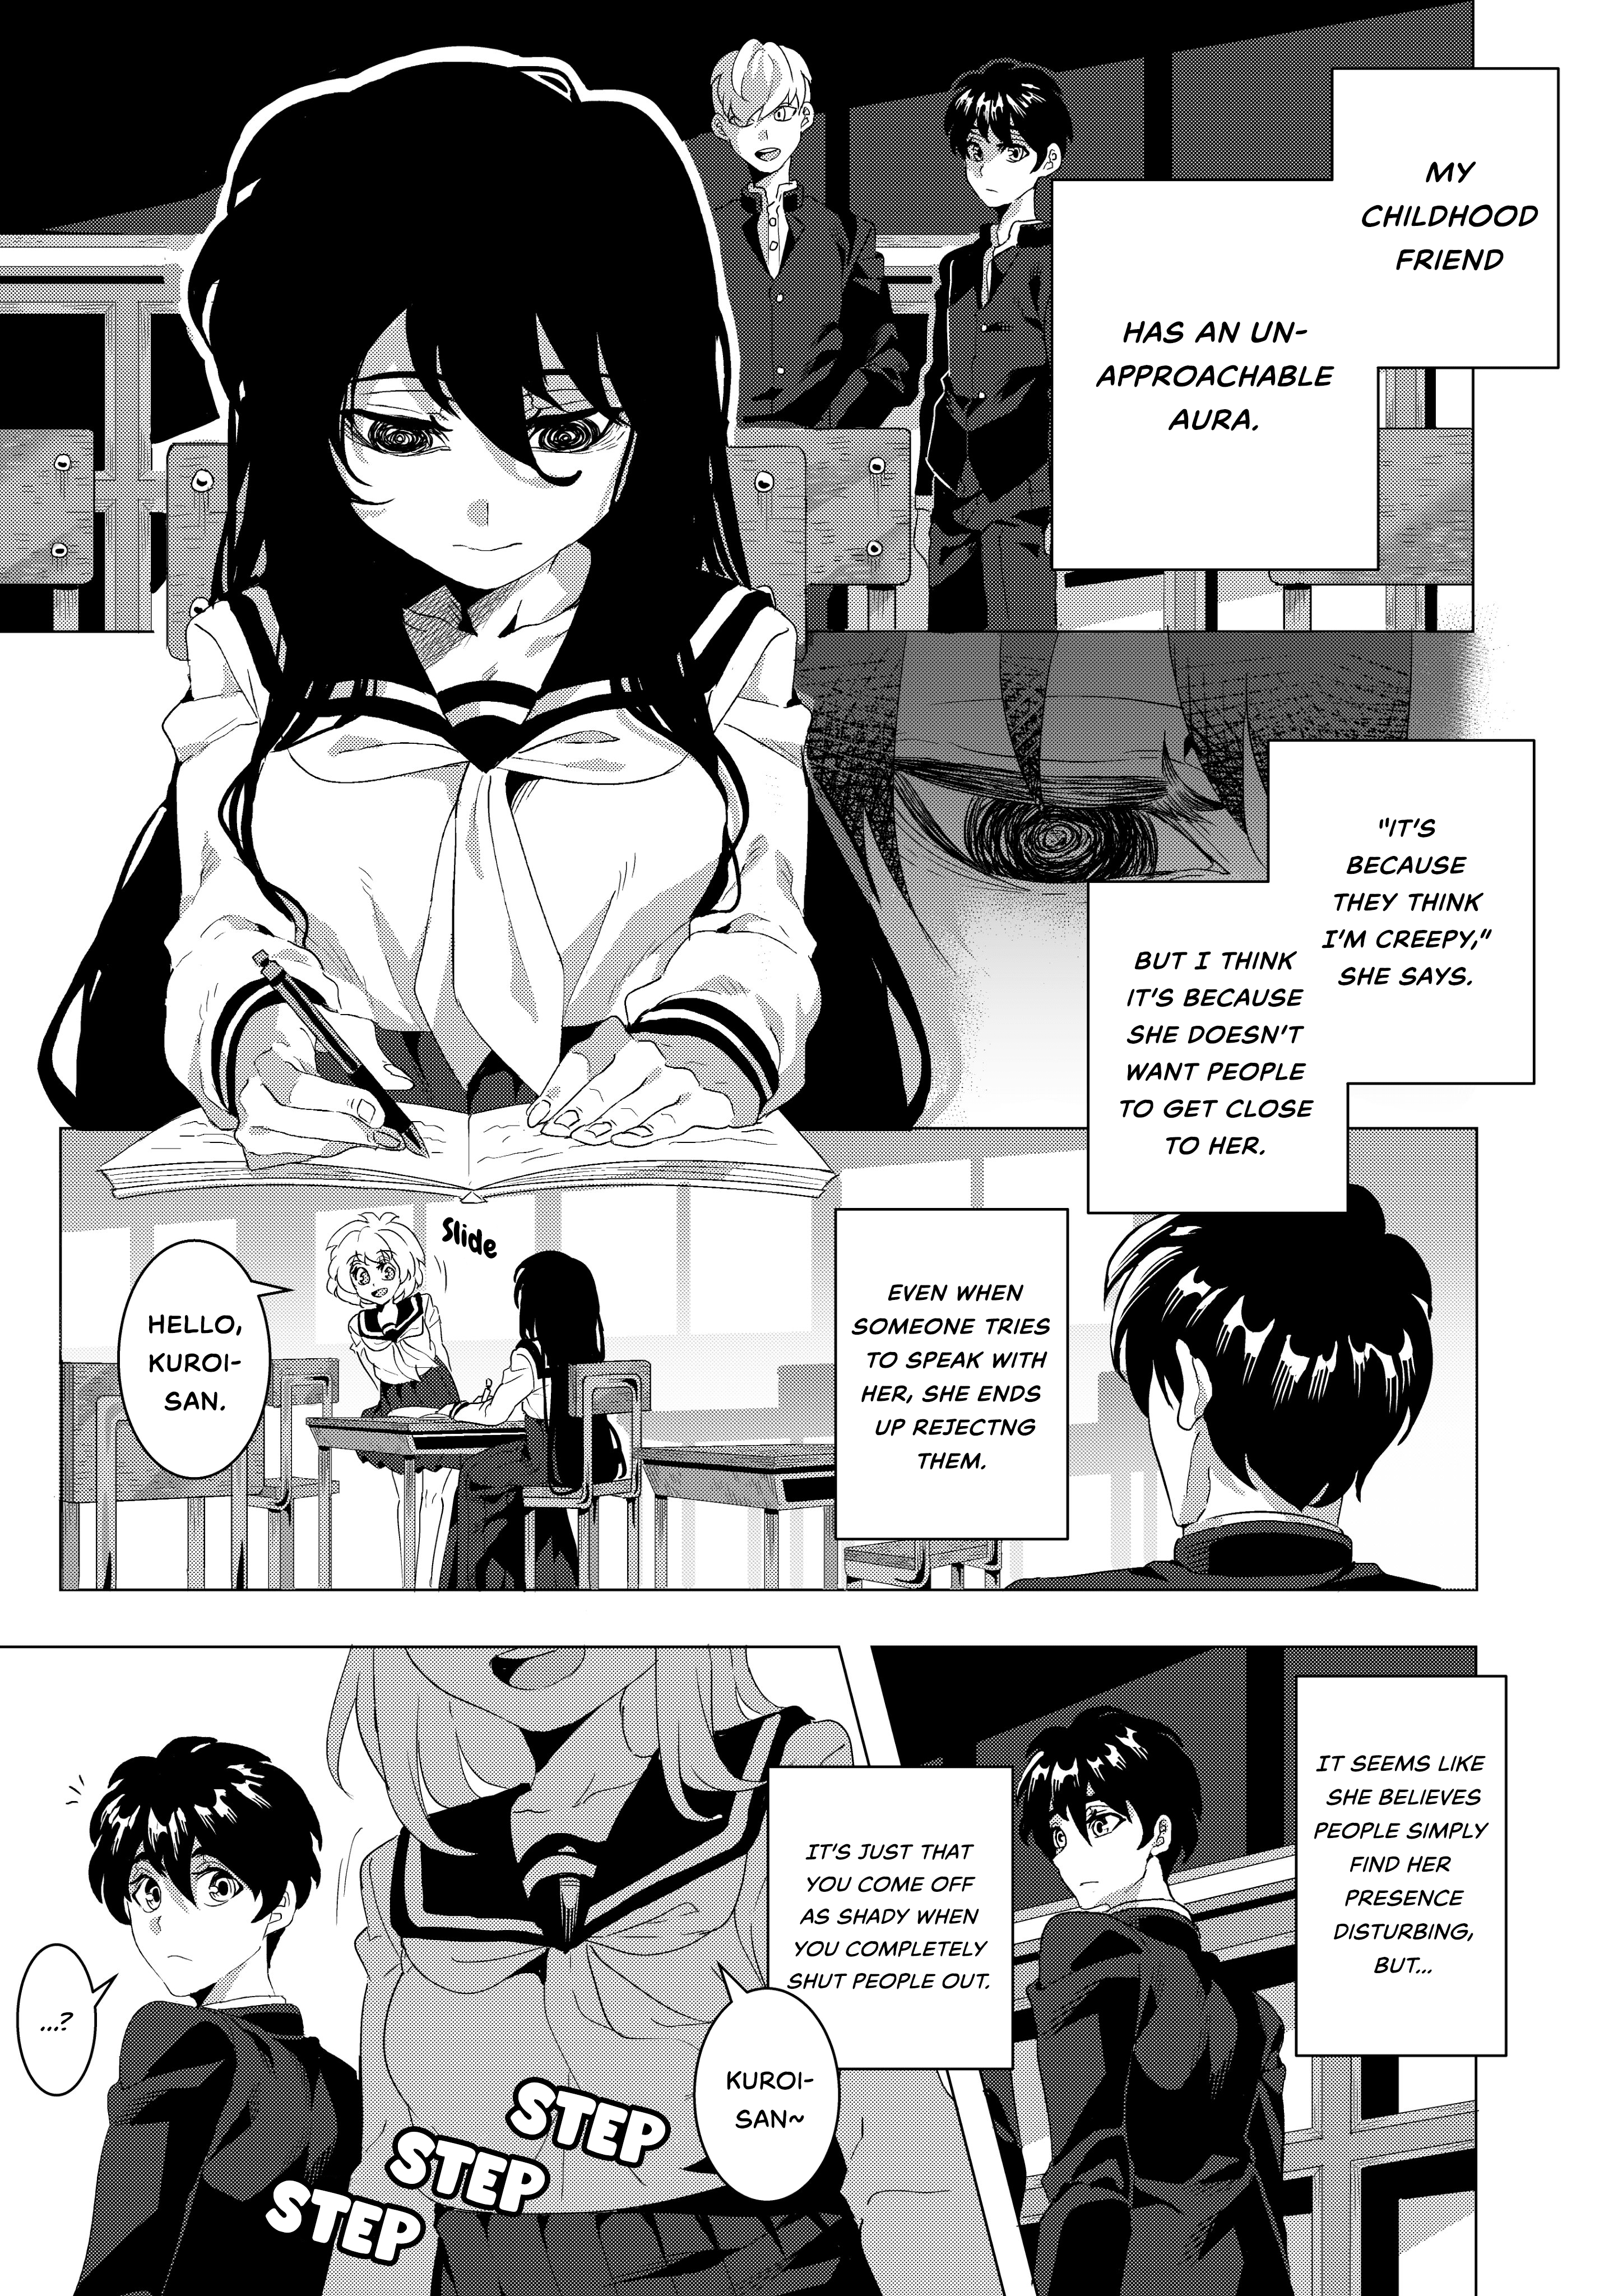 A Story About A Creepy Girl Smile - Page 1